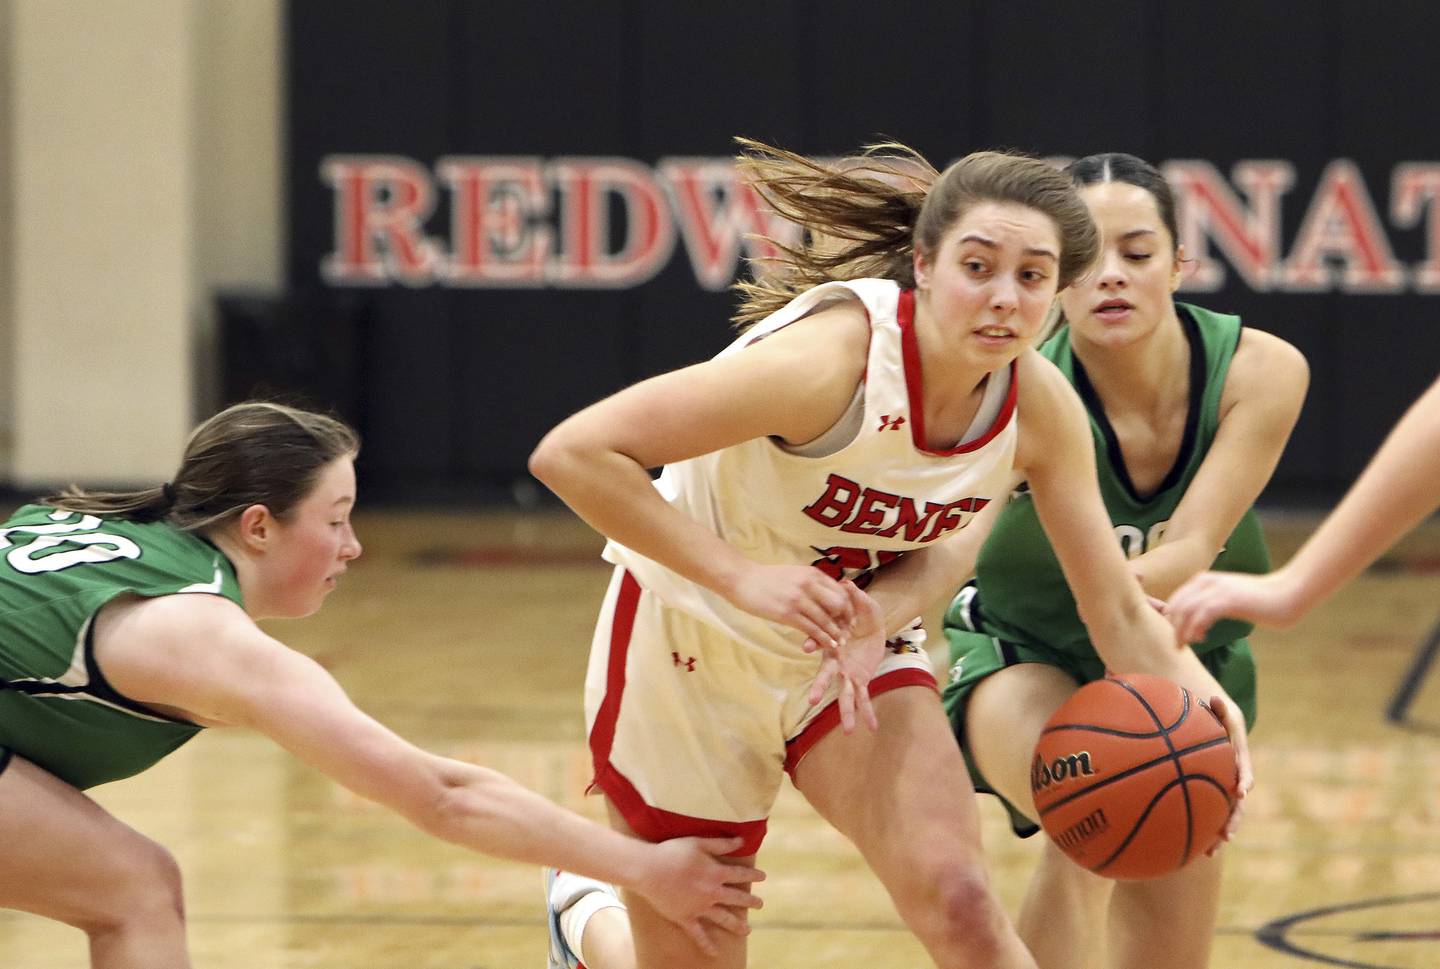 Benet’s Maggie Sularski pushes the ball up the court against York during a game in Lisle on Tuesday, Dec. 20, 2022.